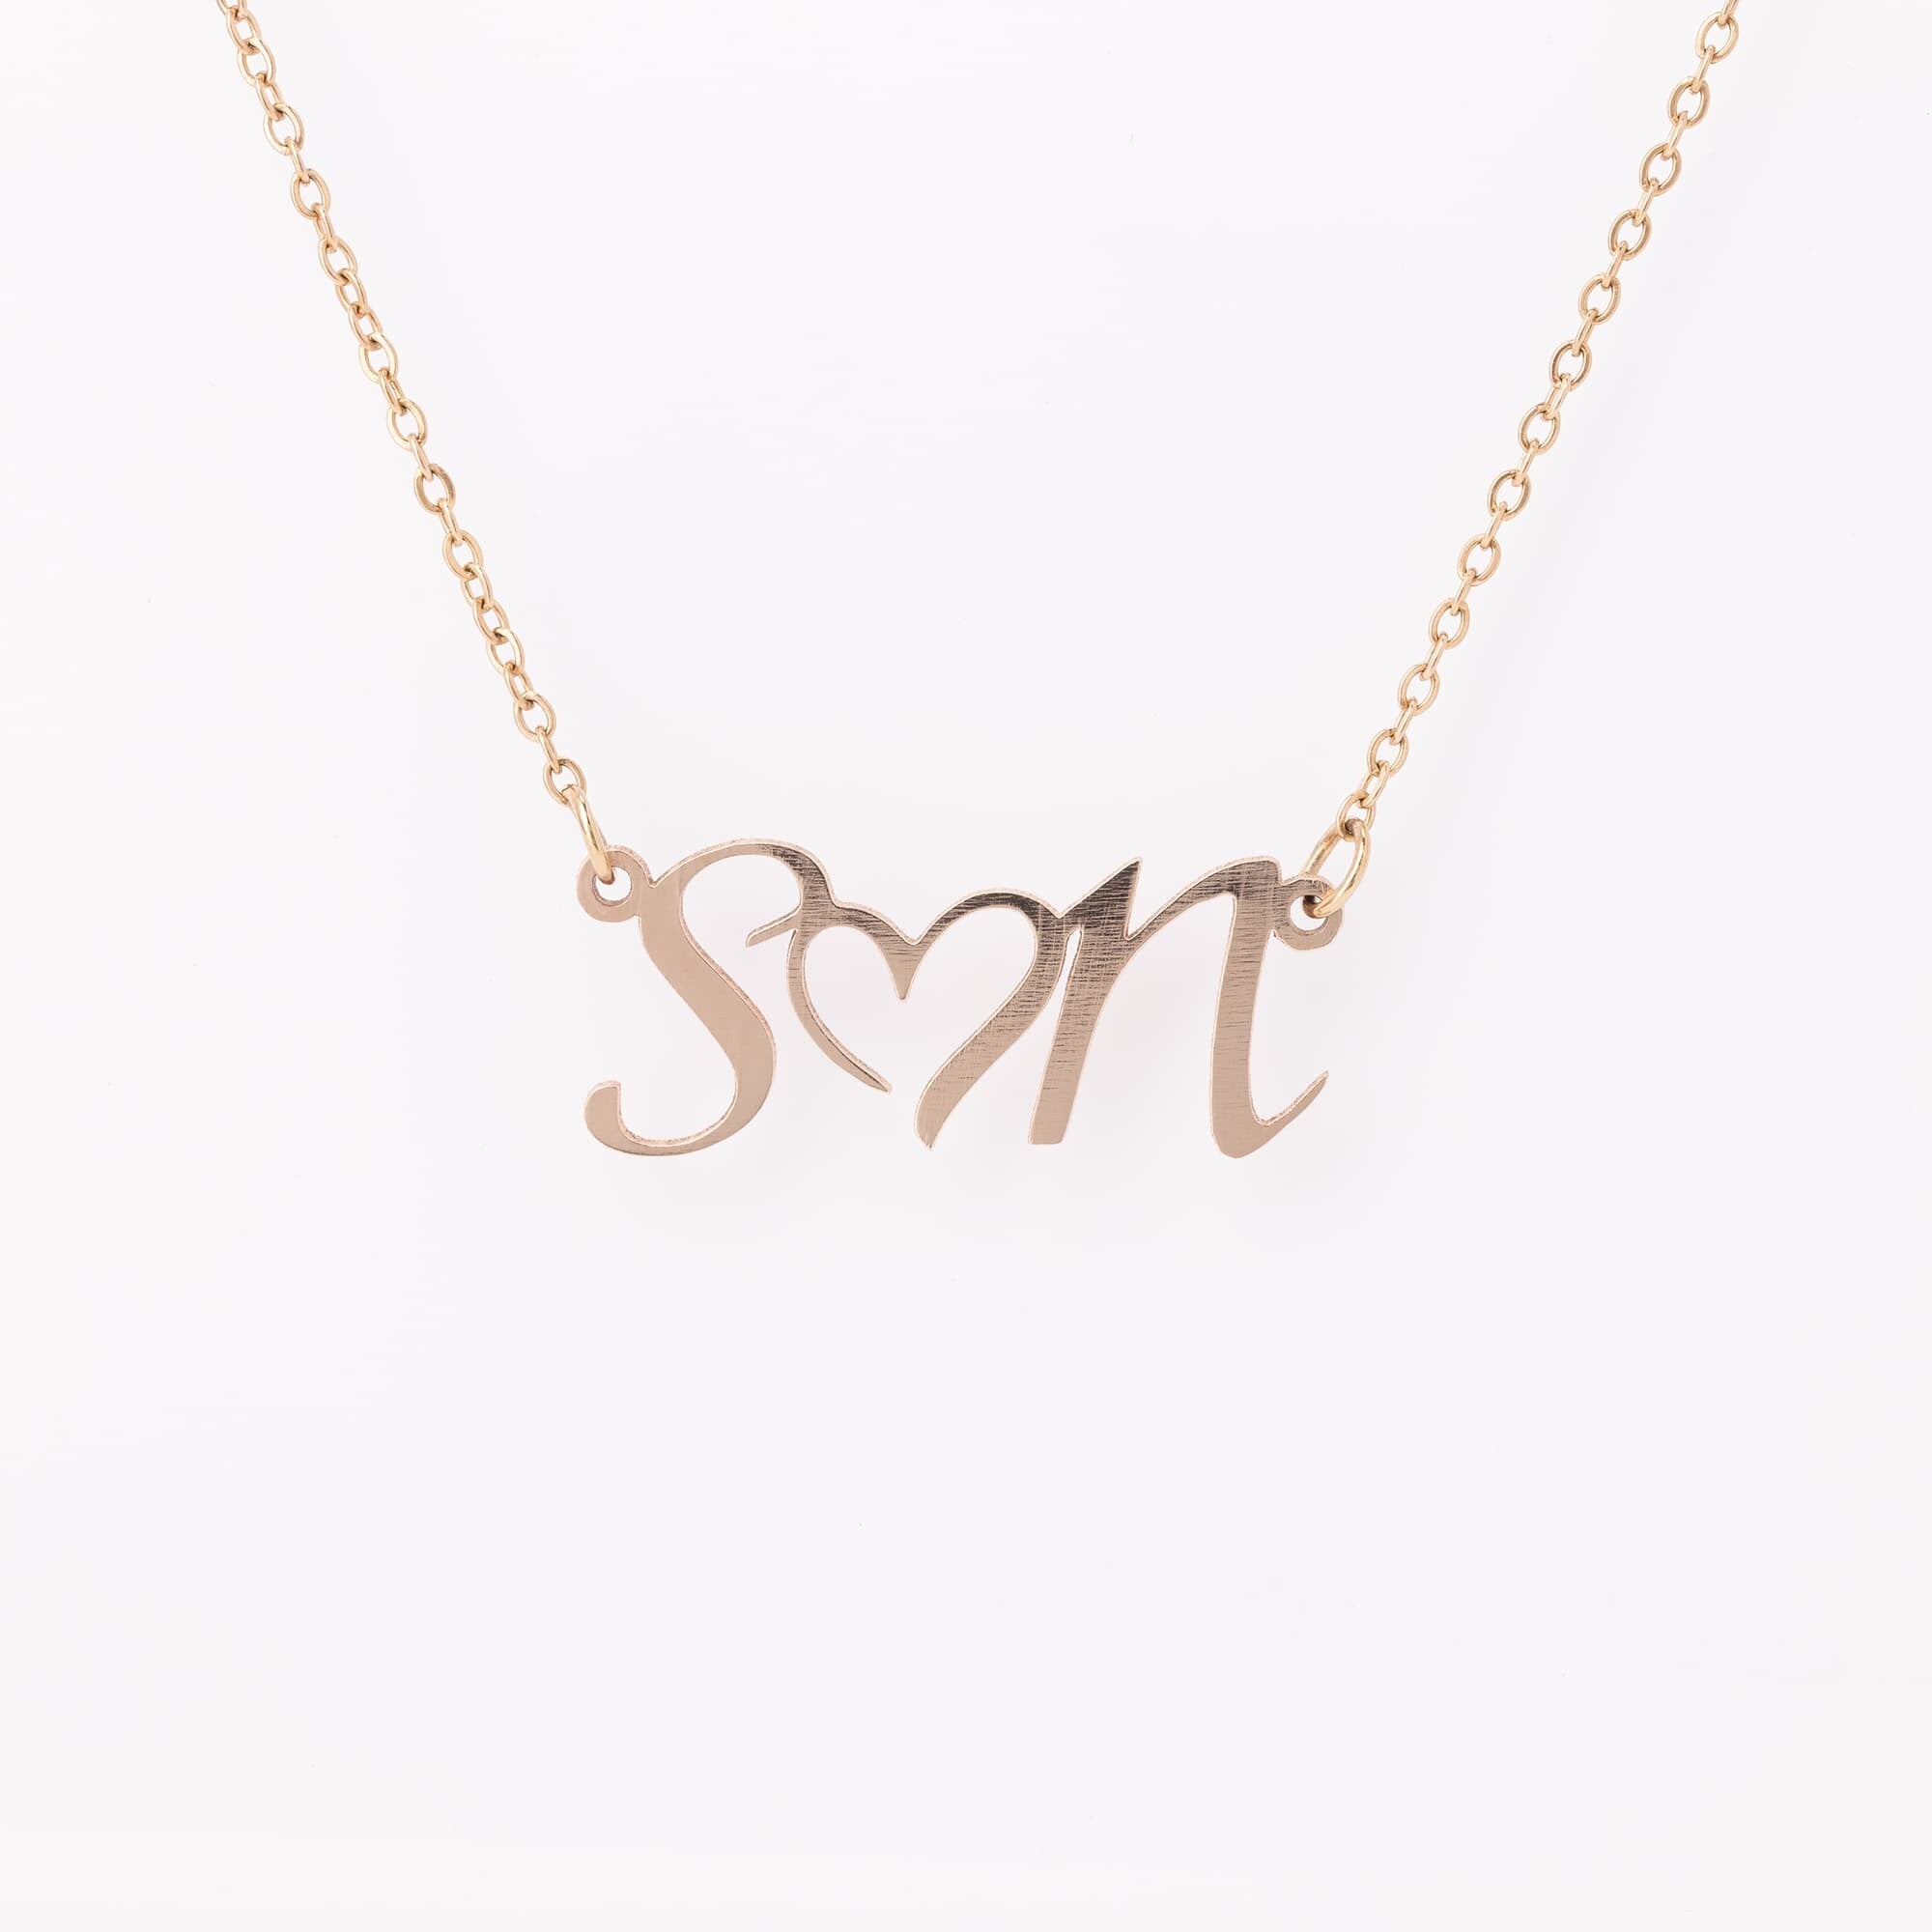 CUSTOM Double Initial Heart NecklaceJewelry - My E Three